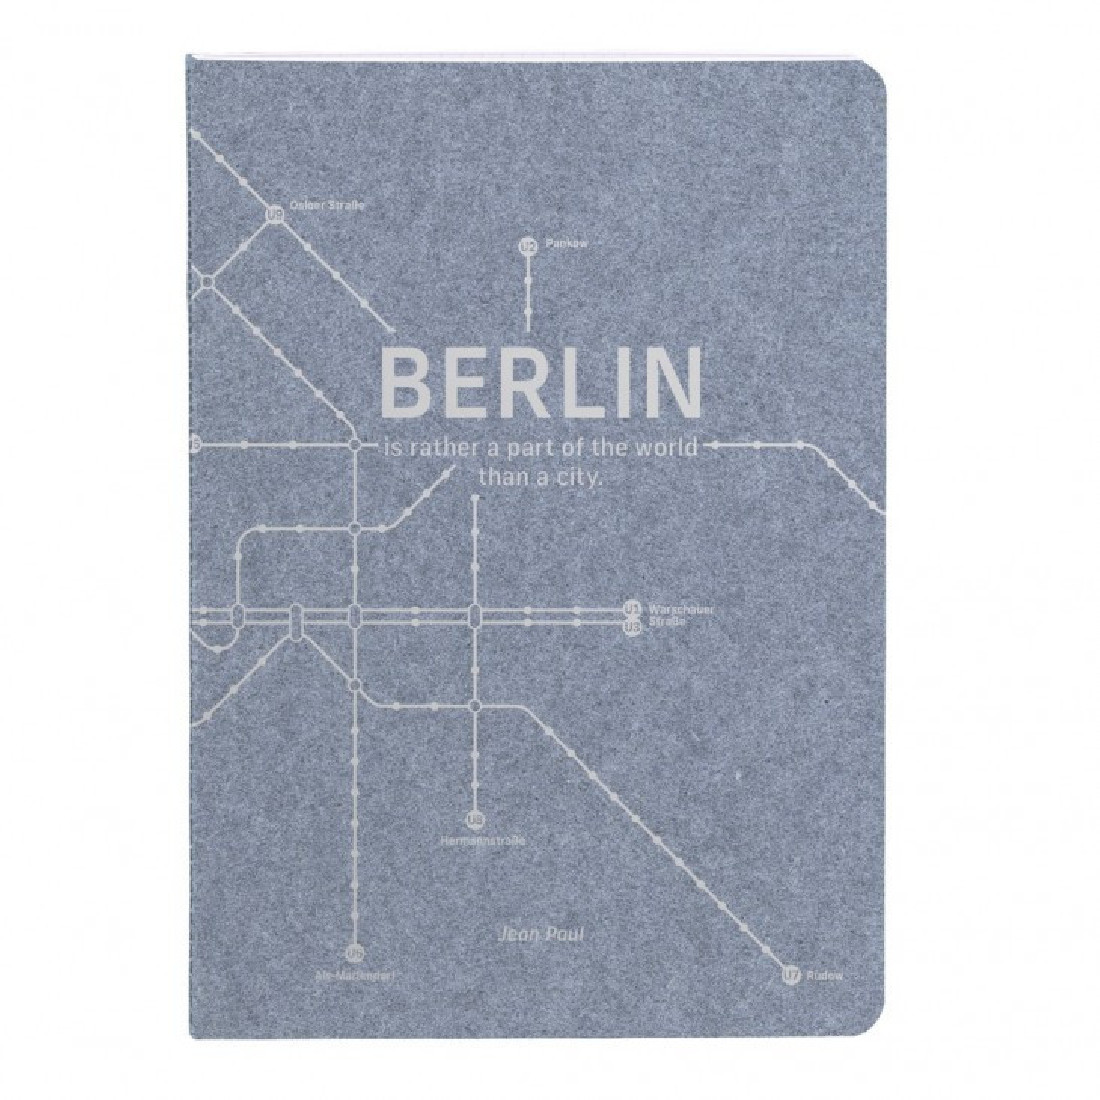 Clairefontaine Rhodia Jeans notebook A6 10,5x14,8cm, Berlin metro, 90gr, lined, 96 pages, 083534